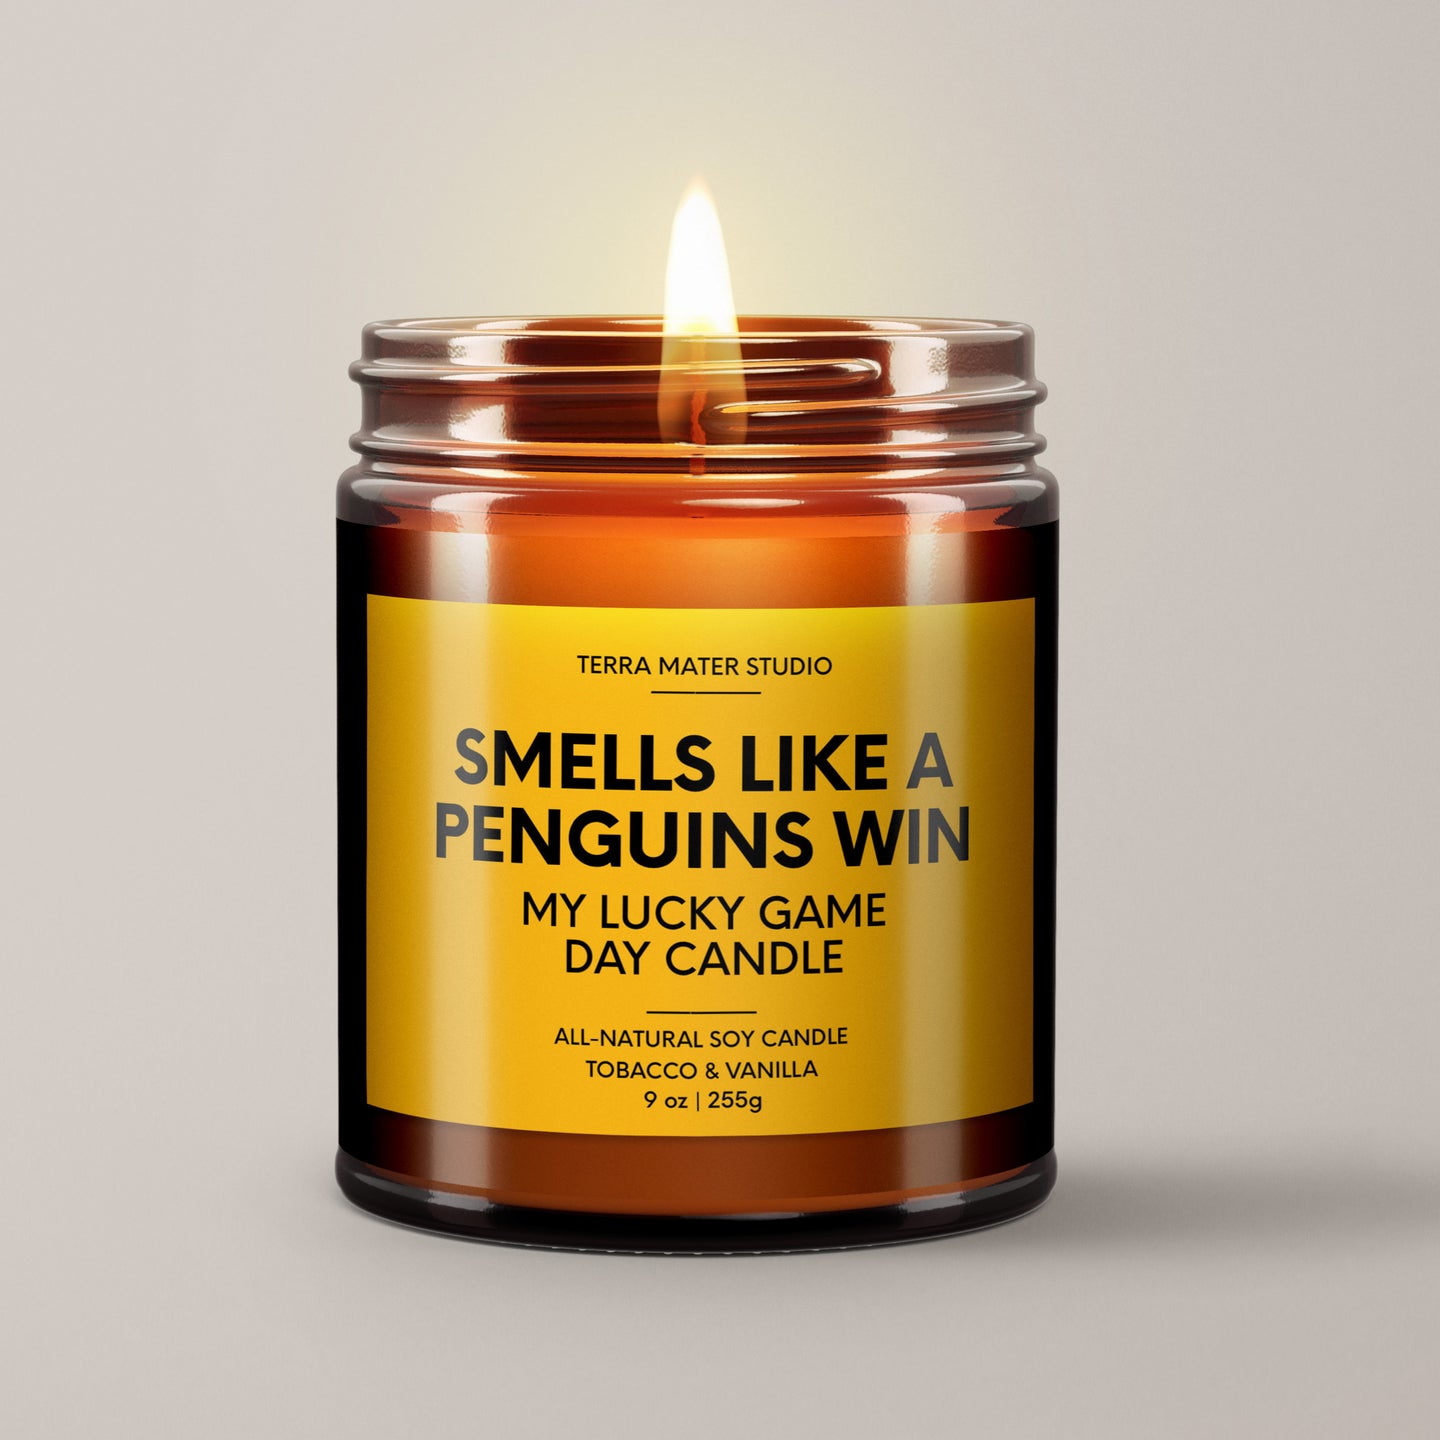 Smells Like A Penguins Win | Pittsburgh Lucky Game Day Candle | Soy Wax Candle